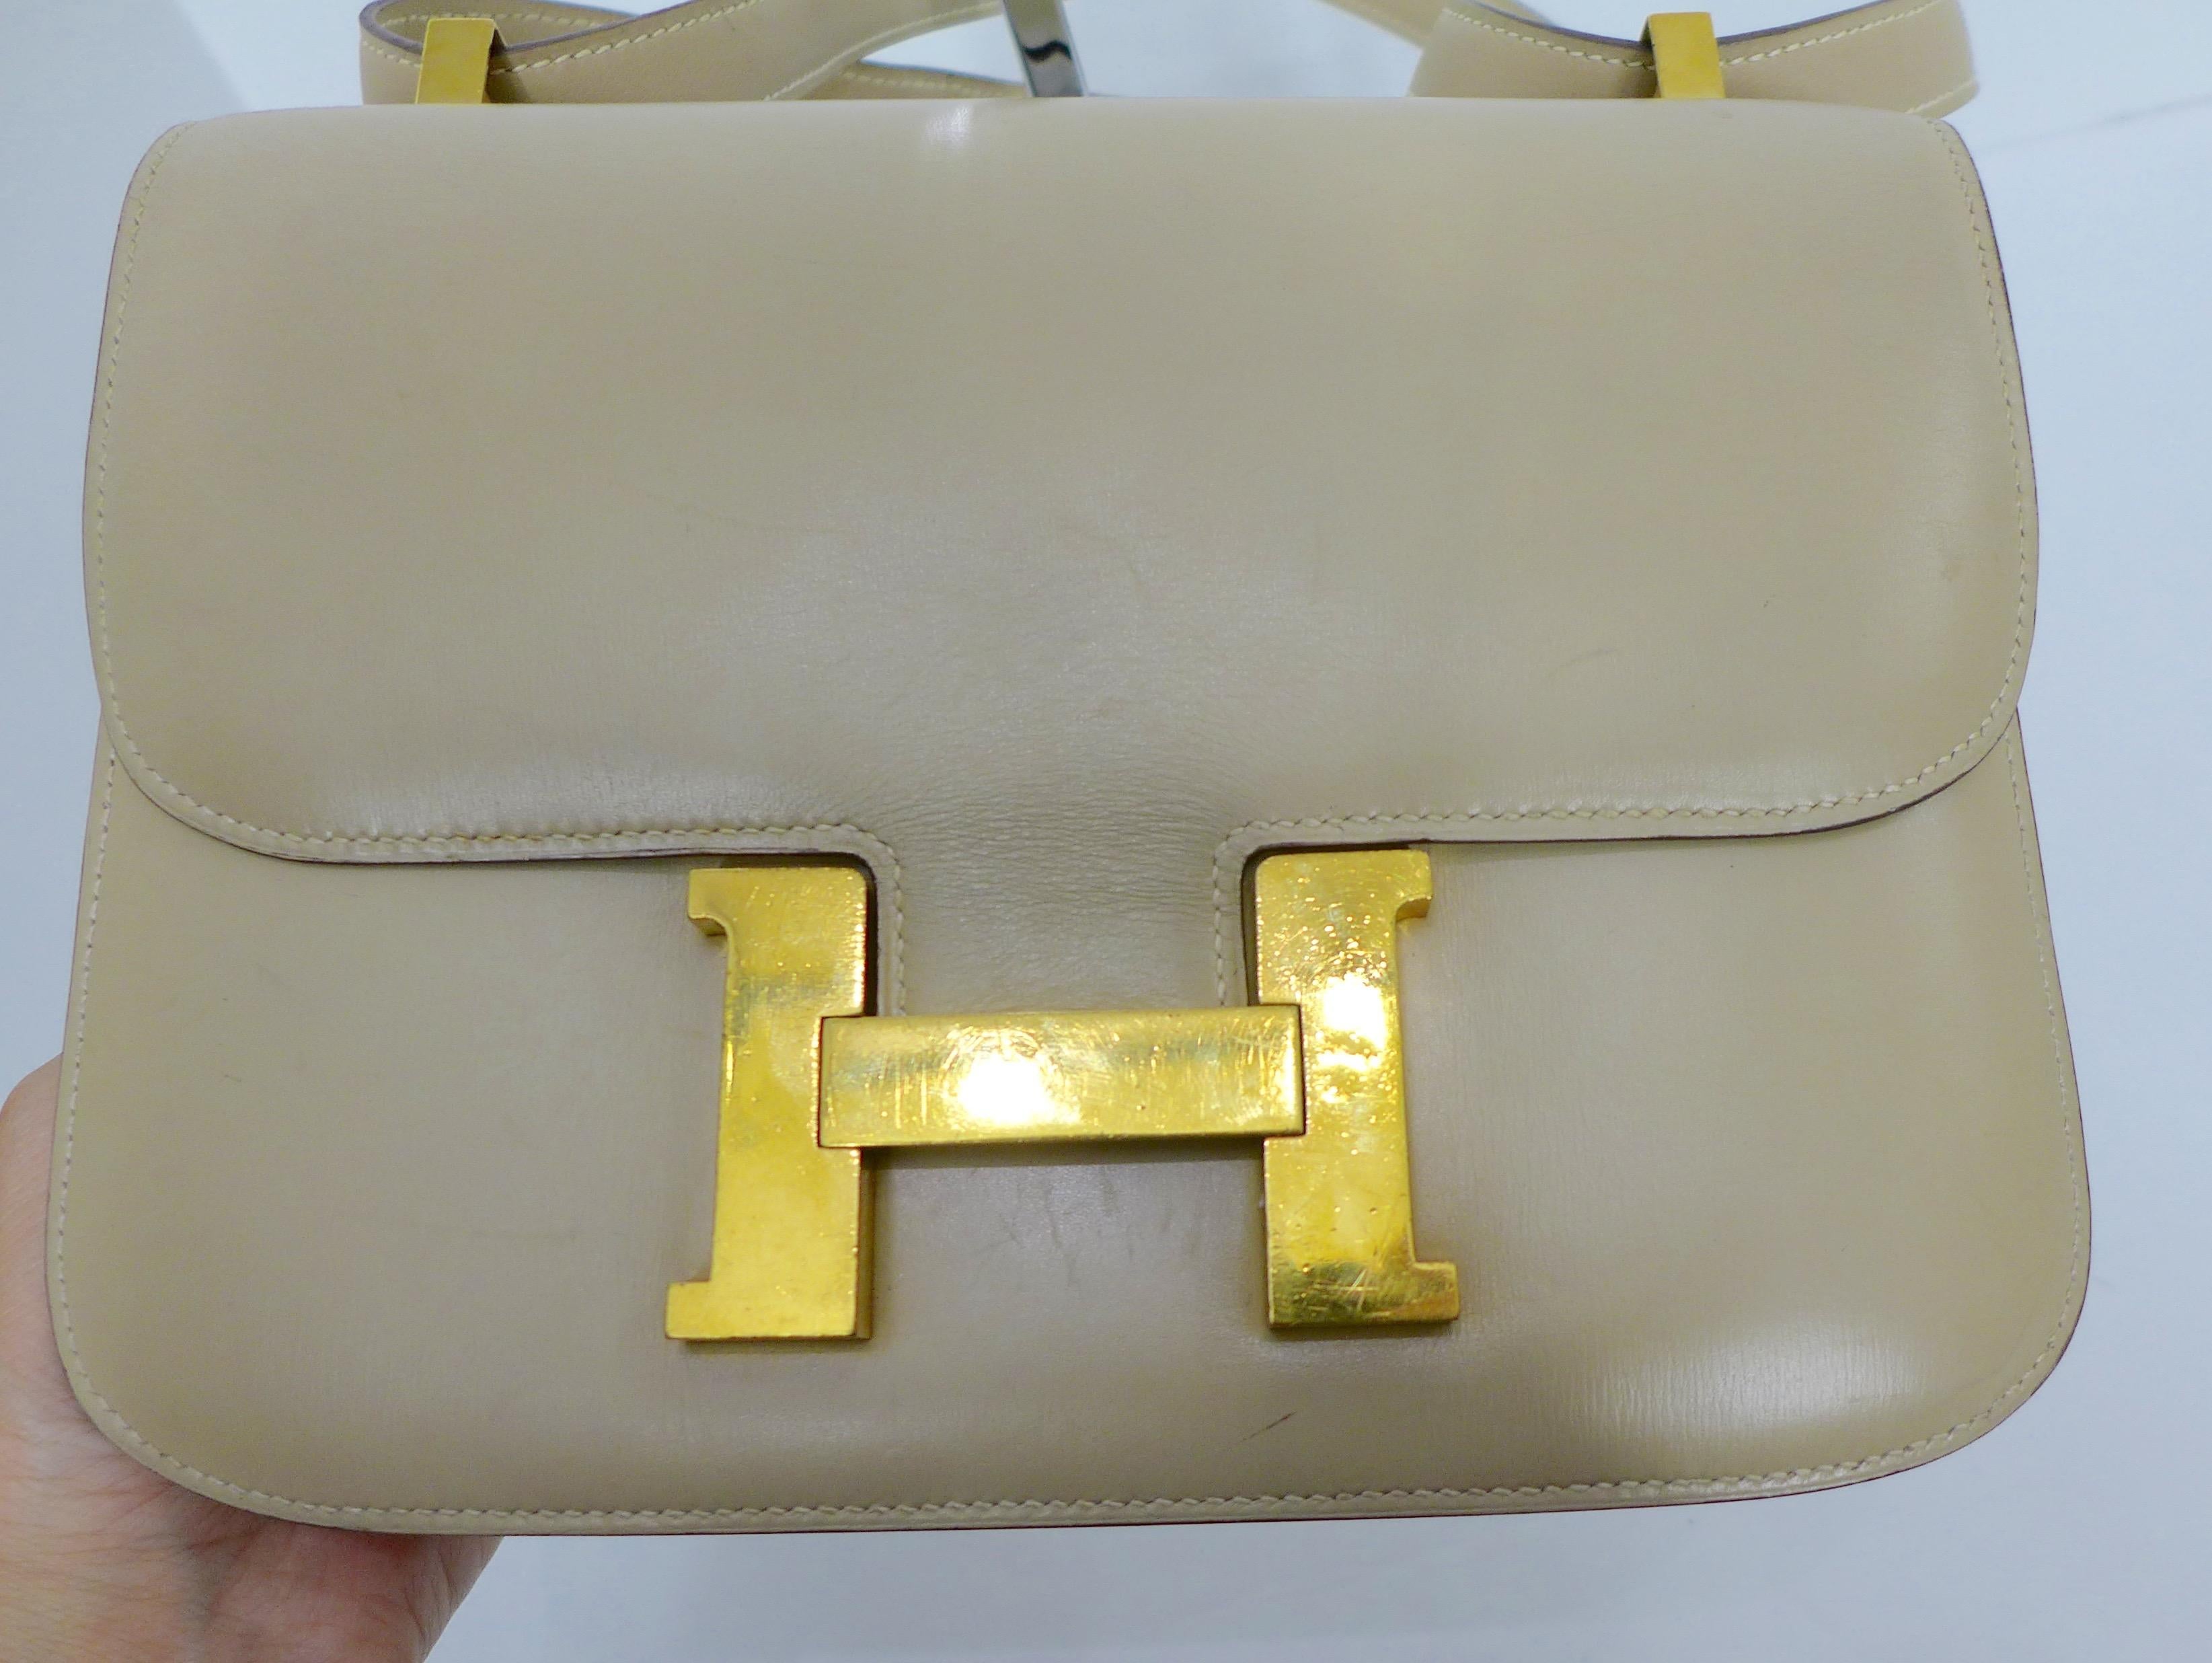 This Hermes leather Constance bag features a gold H closure, gold hardware, and a bone top stitch. Made in France. 

I have adjusted the lighting to show the extent of the interior condition.
The outside snapshot shows the true color of the bag.
It